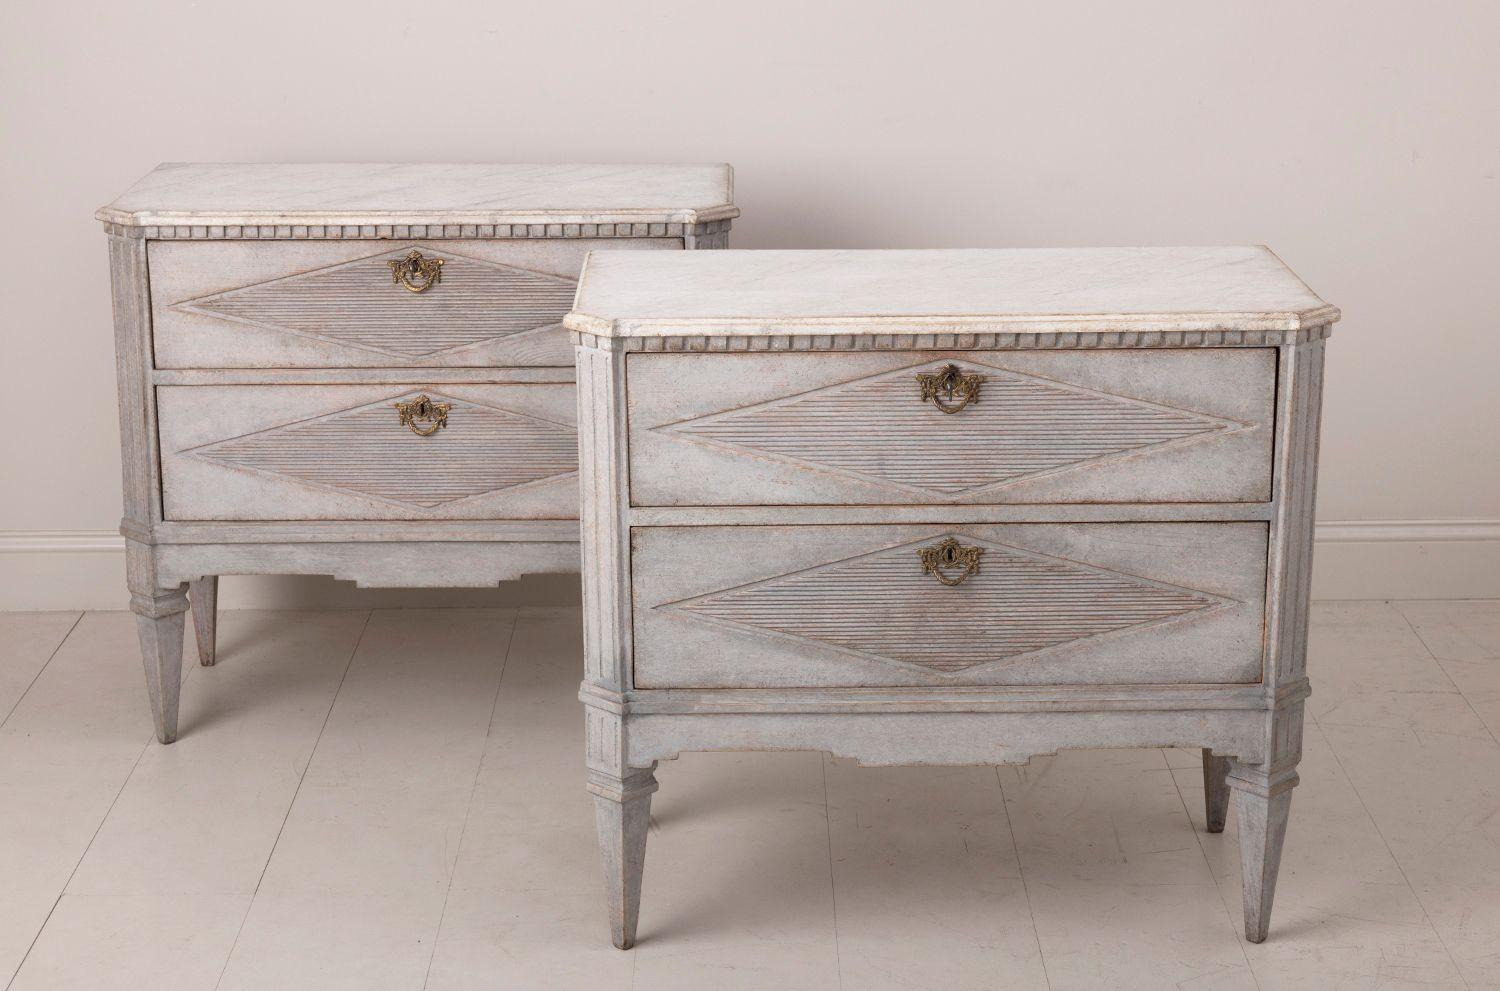 20th Century Swedish Gustavian Style Pair of Painted Bedside Commodes with Marbleized Tops